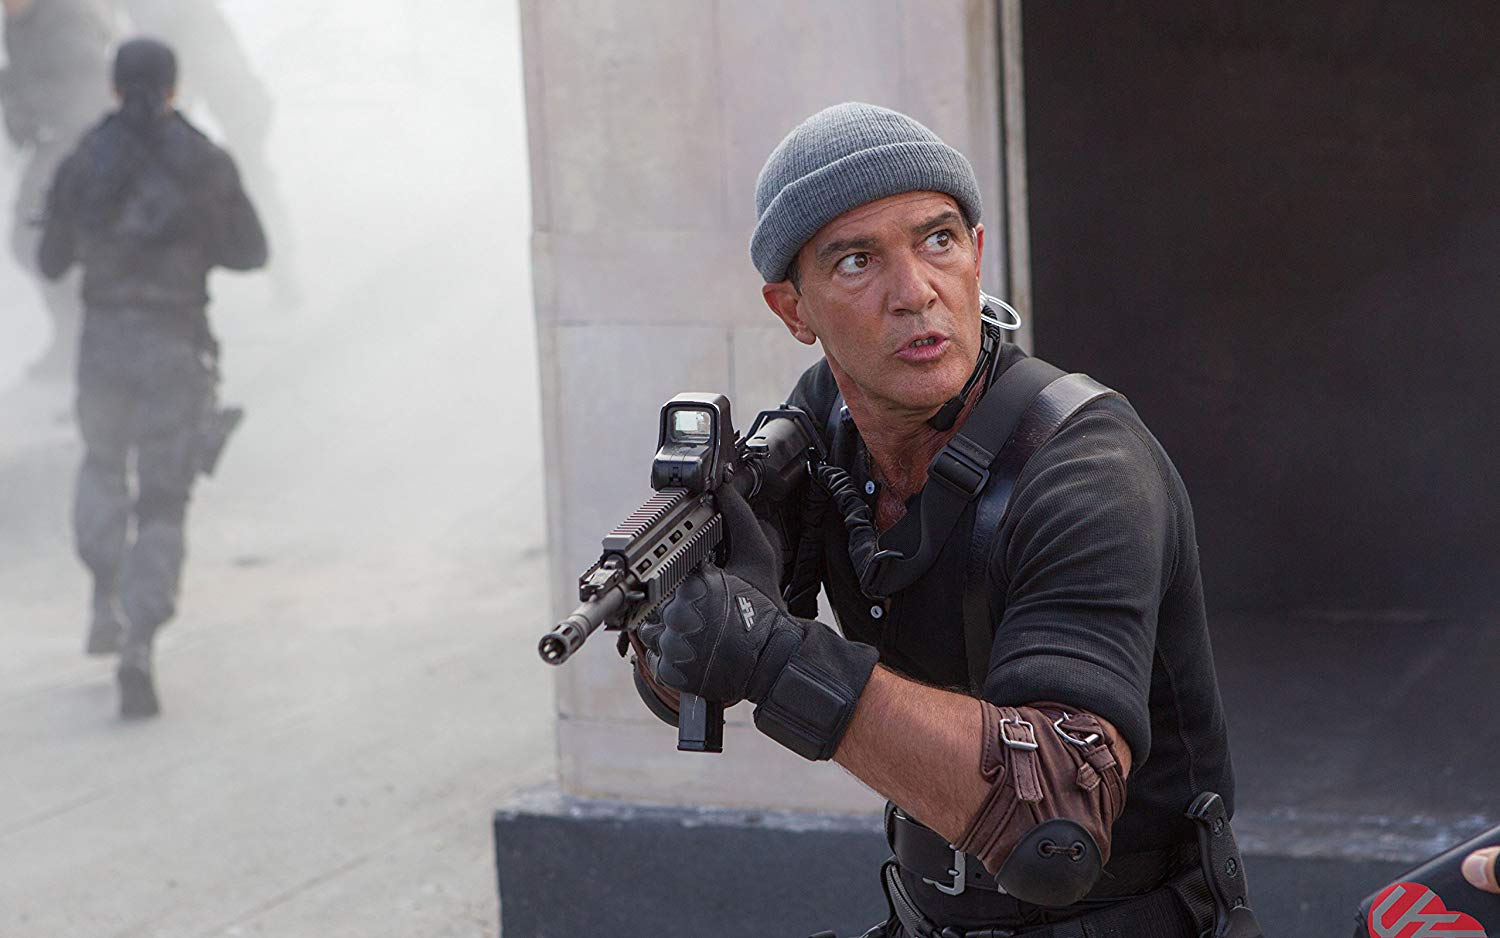 Posterhouzz Movie The Expendables 3 The Expendables - Antonio Banderas The Expendables 3 - HD Wallpaper 